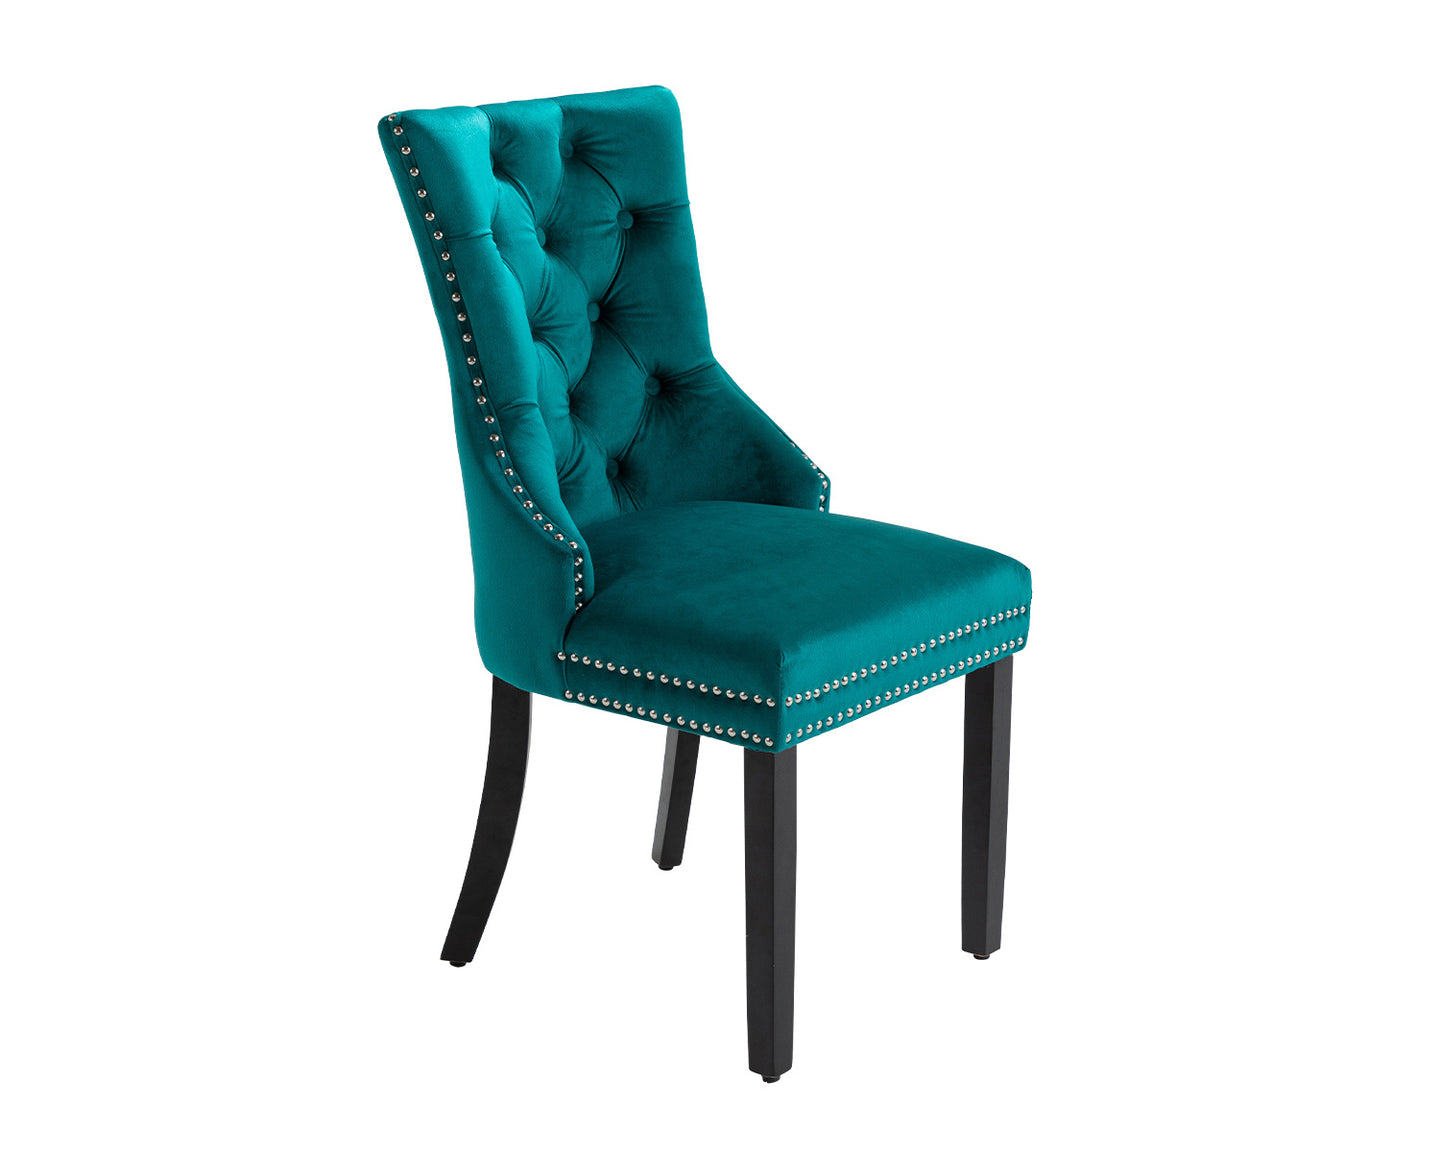 Ashford Dining Chair in Teal Velvet with Square Knocker And Black Legs